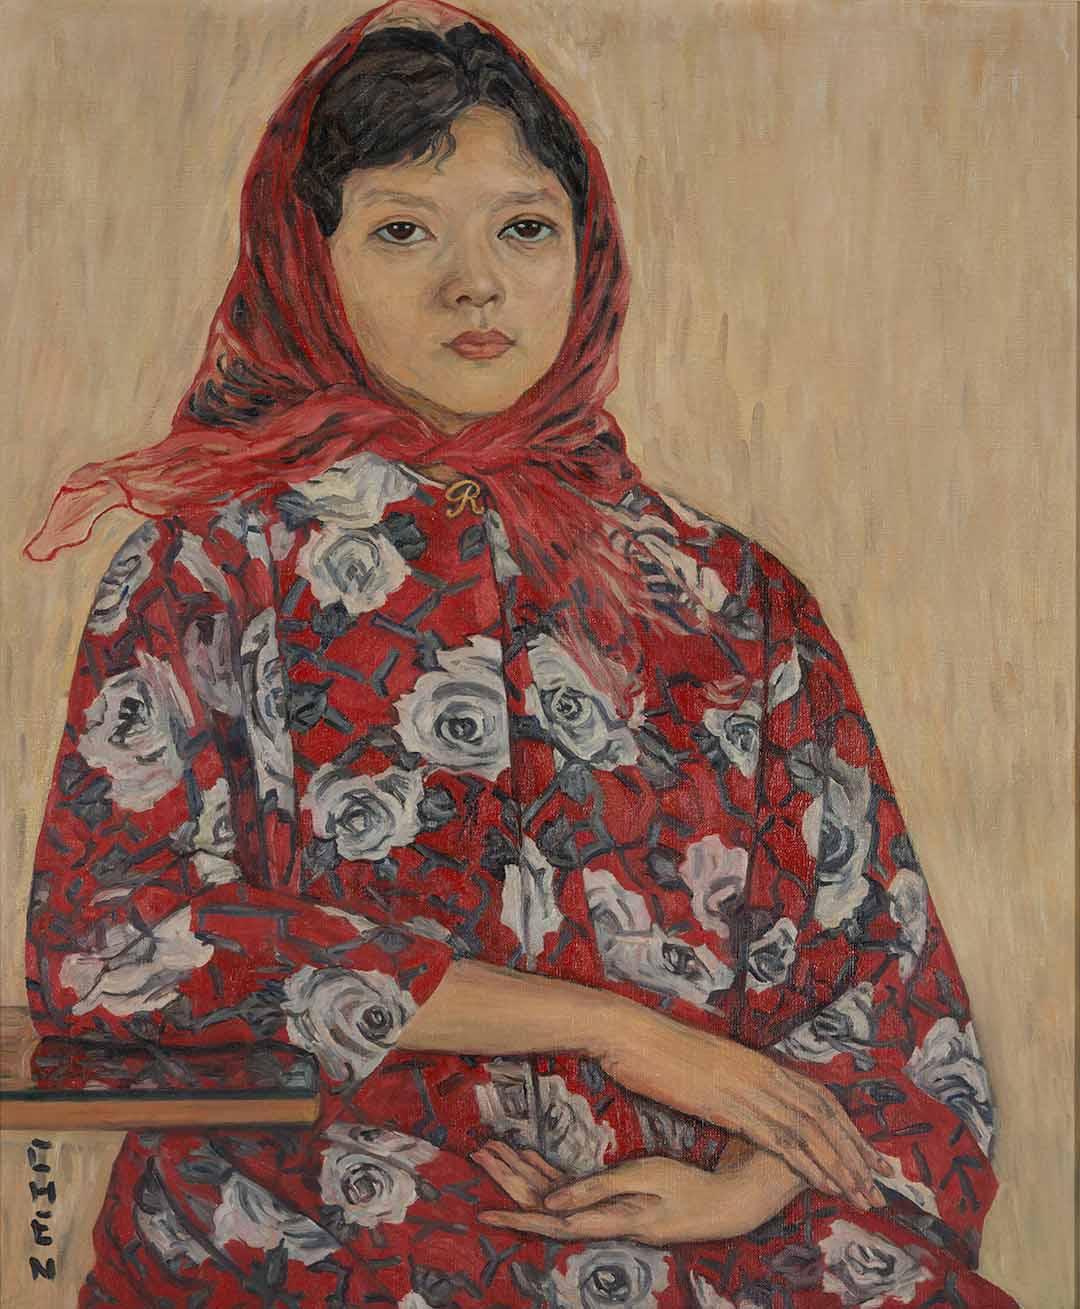 A portrait of Rohani painted by Georgette Chen.